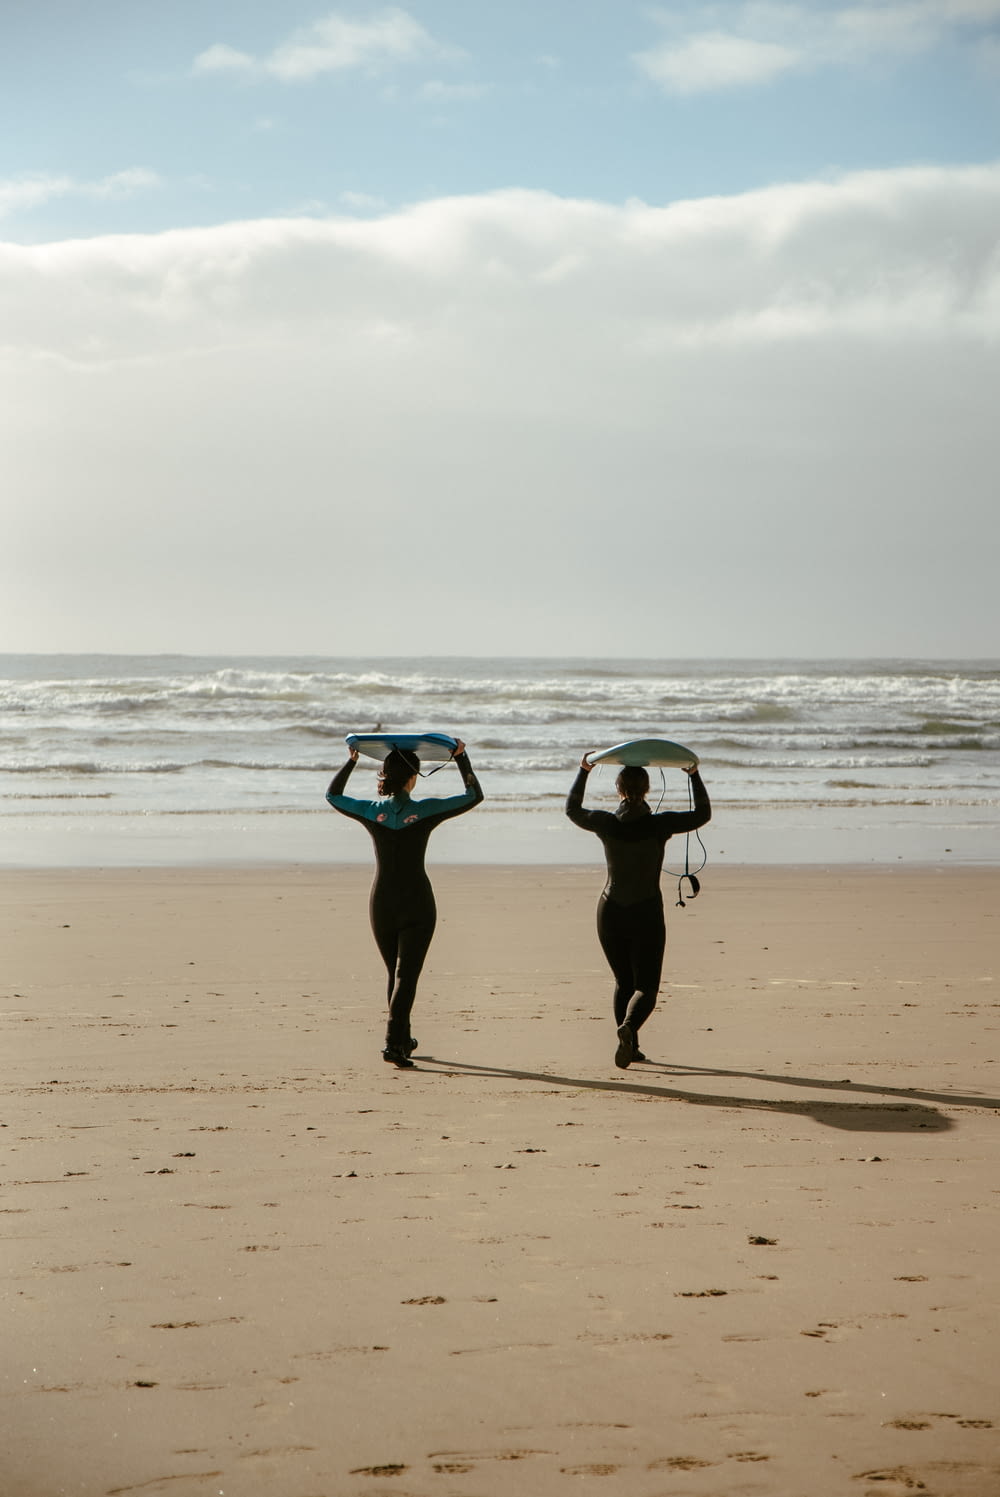 two people walking on a beach carrying surfboards